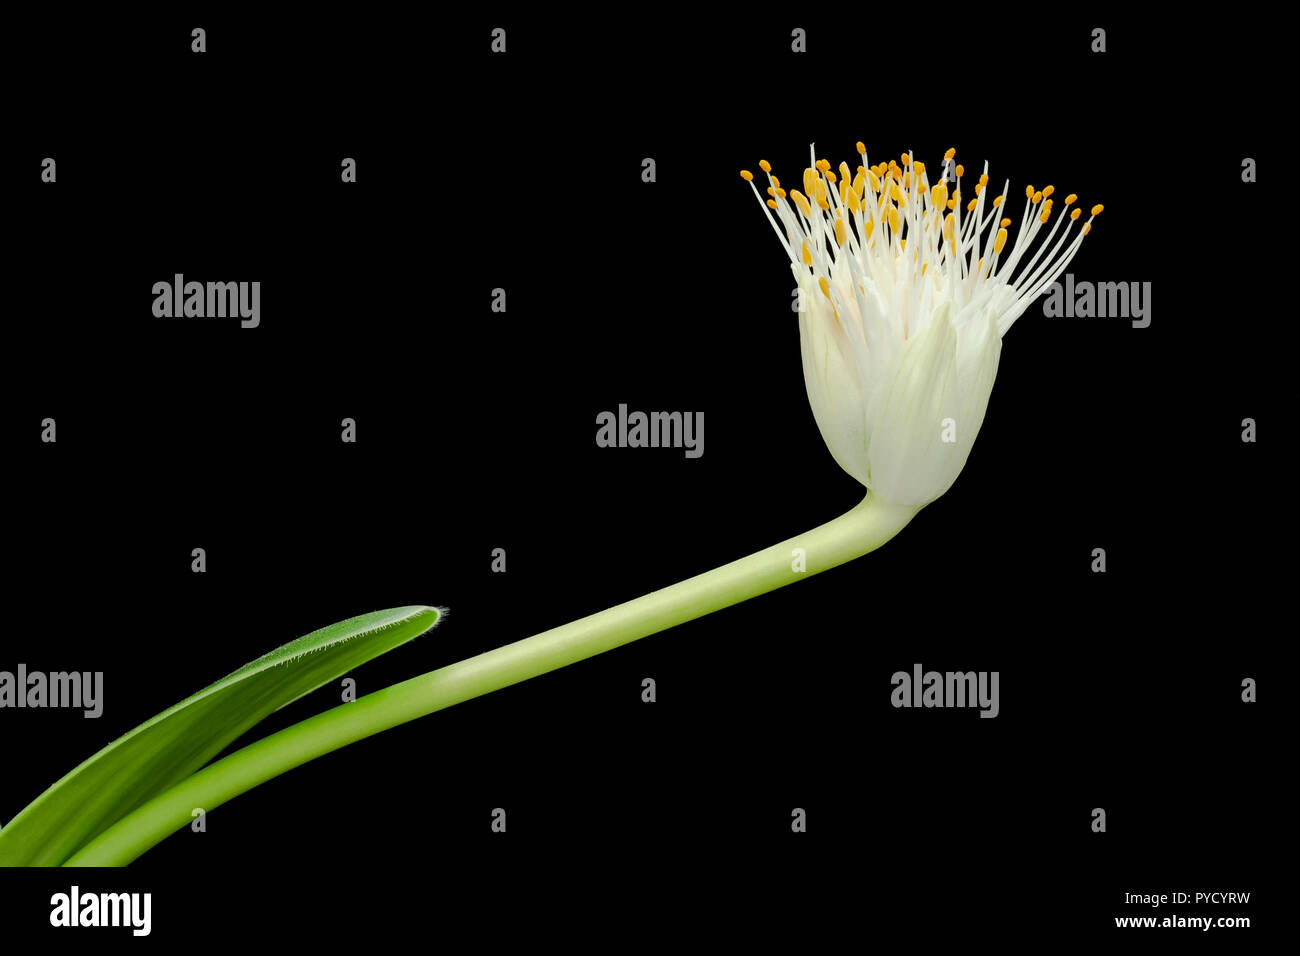 Paintbrush plant, or Paintbrush Lily, Haemanthus albiflos, a succulent bulb from South Africa (in cultivation).  Family Amaryllidaceae Stock Photo